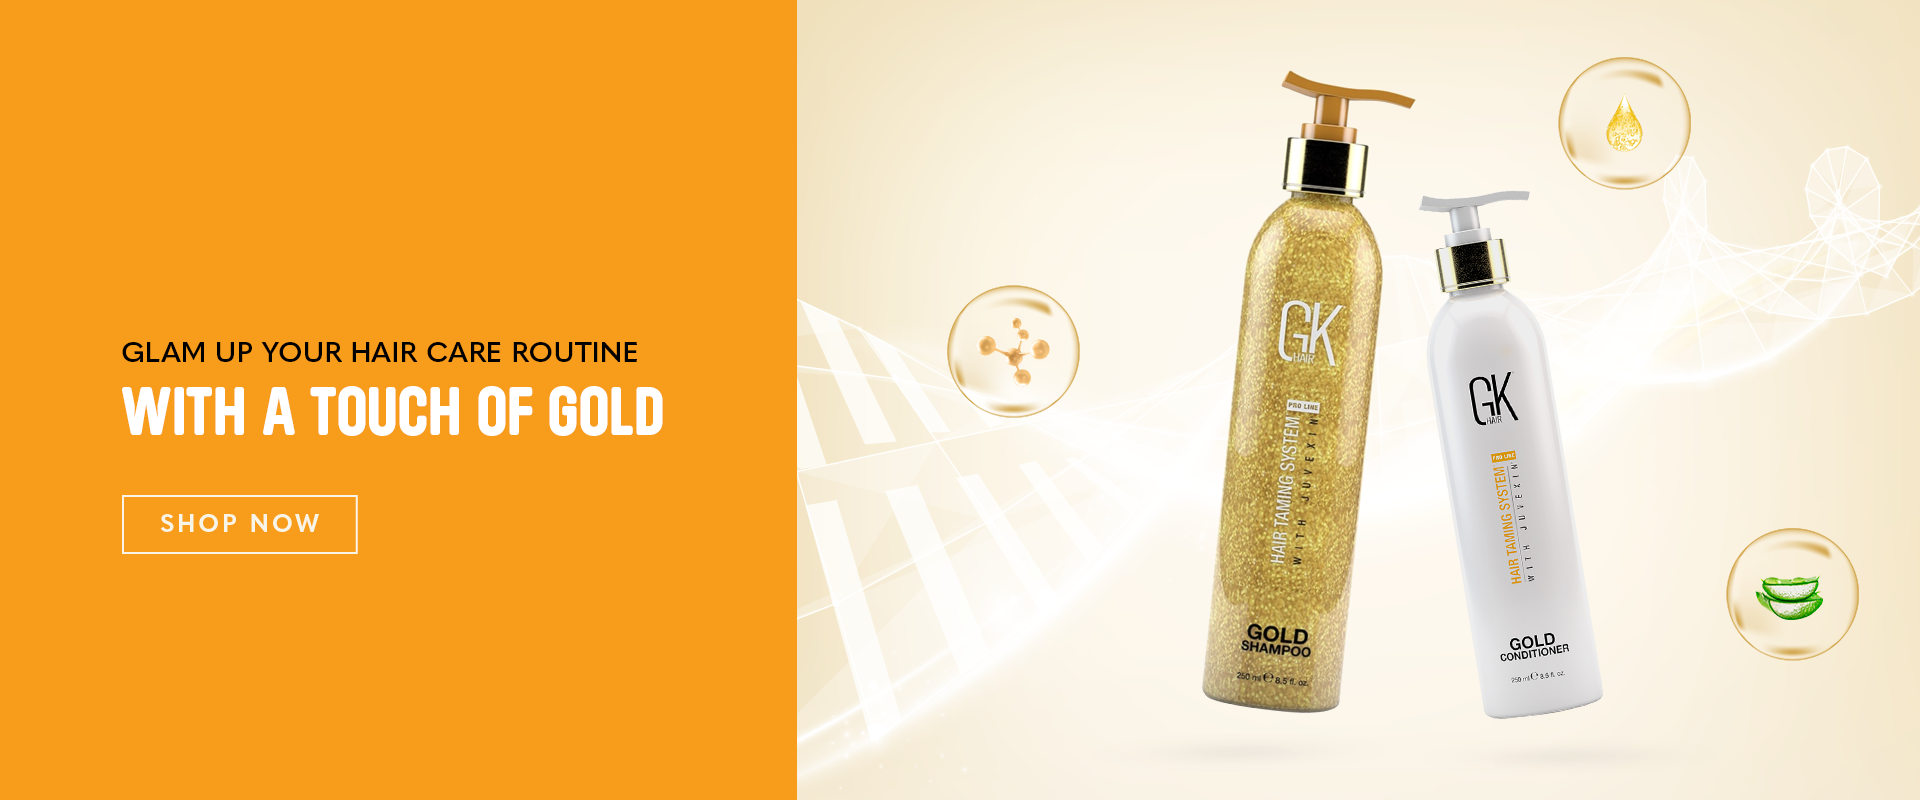 GK Hair Gold Shampoo and Conditioner